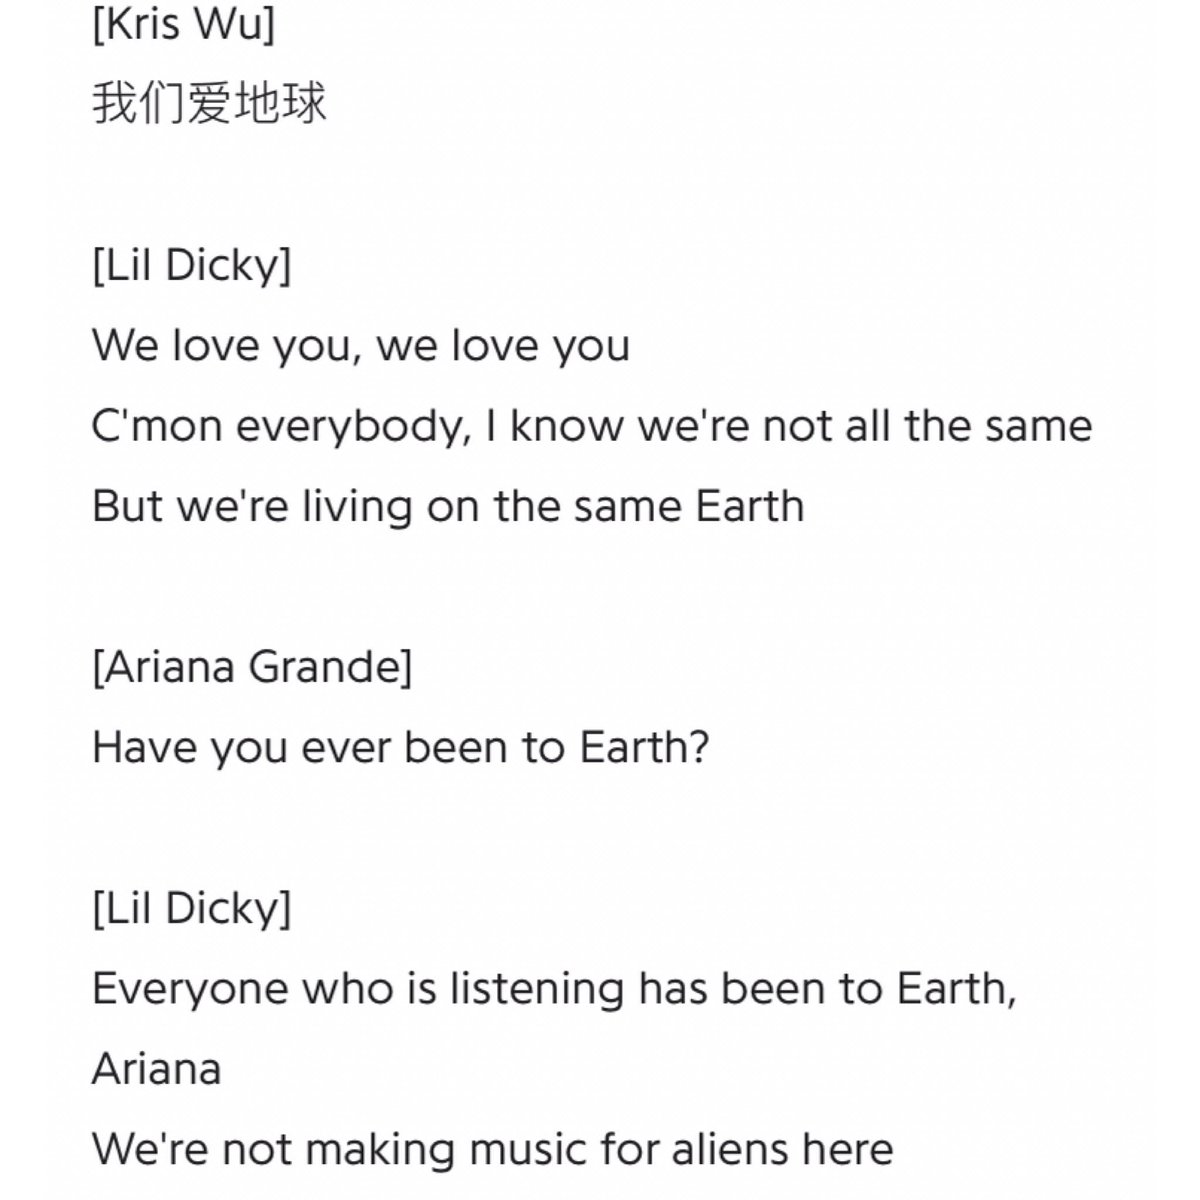 Justin Bieber Crew on Twitter: "(4) Here are the lyrics to “Earth” by Lil  Dicky featuring Justin Bieber and 30 other well-known artists:  https://t.co/NjTOcG8Xyr" / Twitter